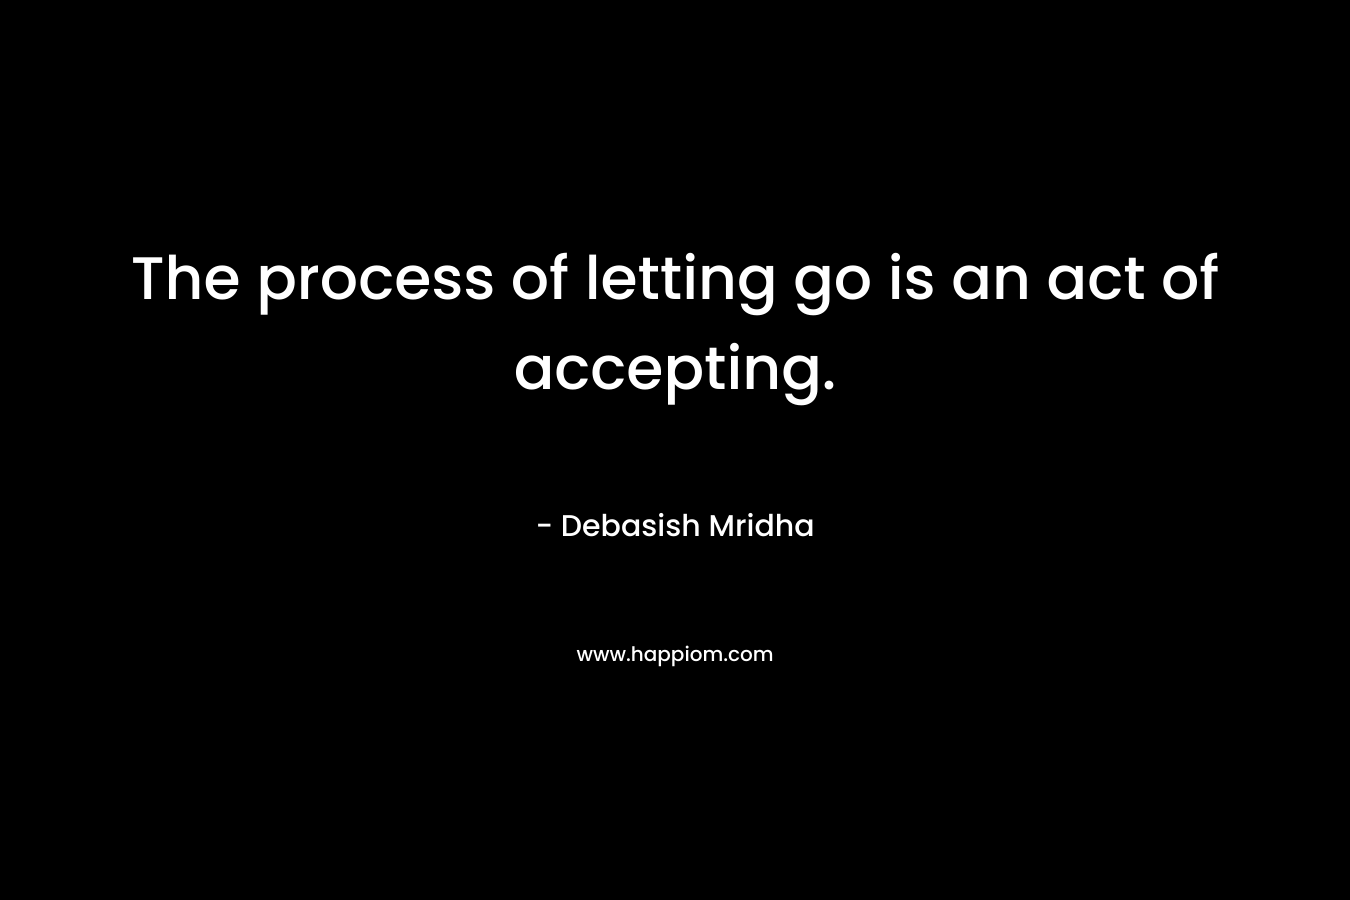 The process of letting go is an act of accepting. – Debasish Mridha